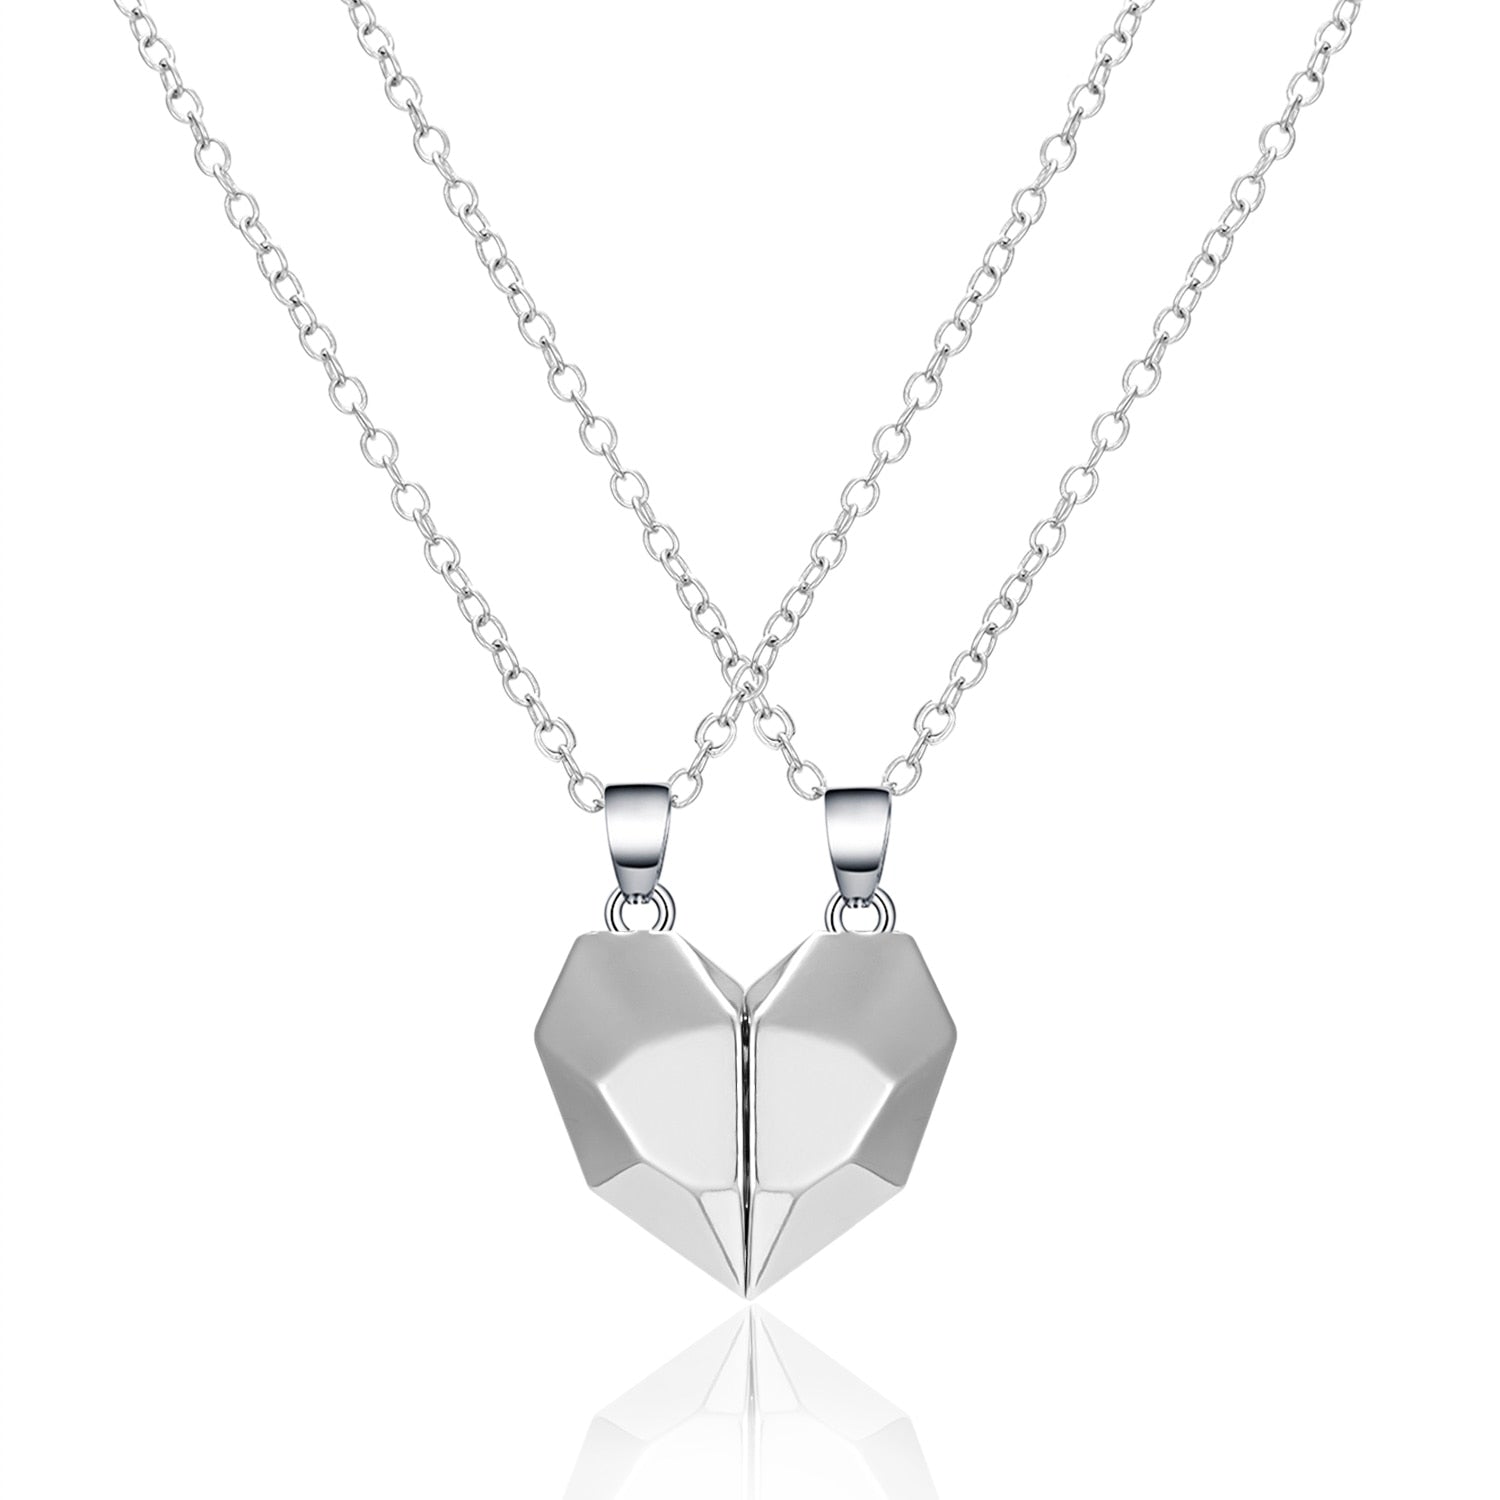 Magnetic Heart Couple Necklaces - BigBeryl All White